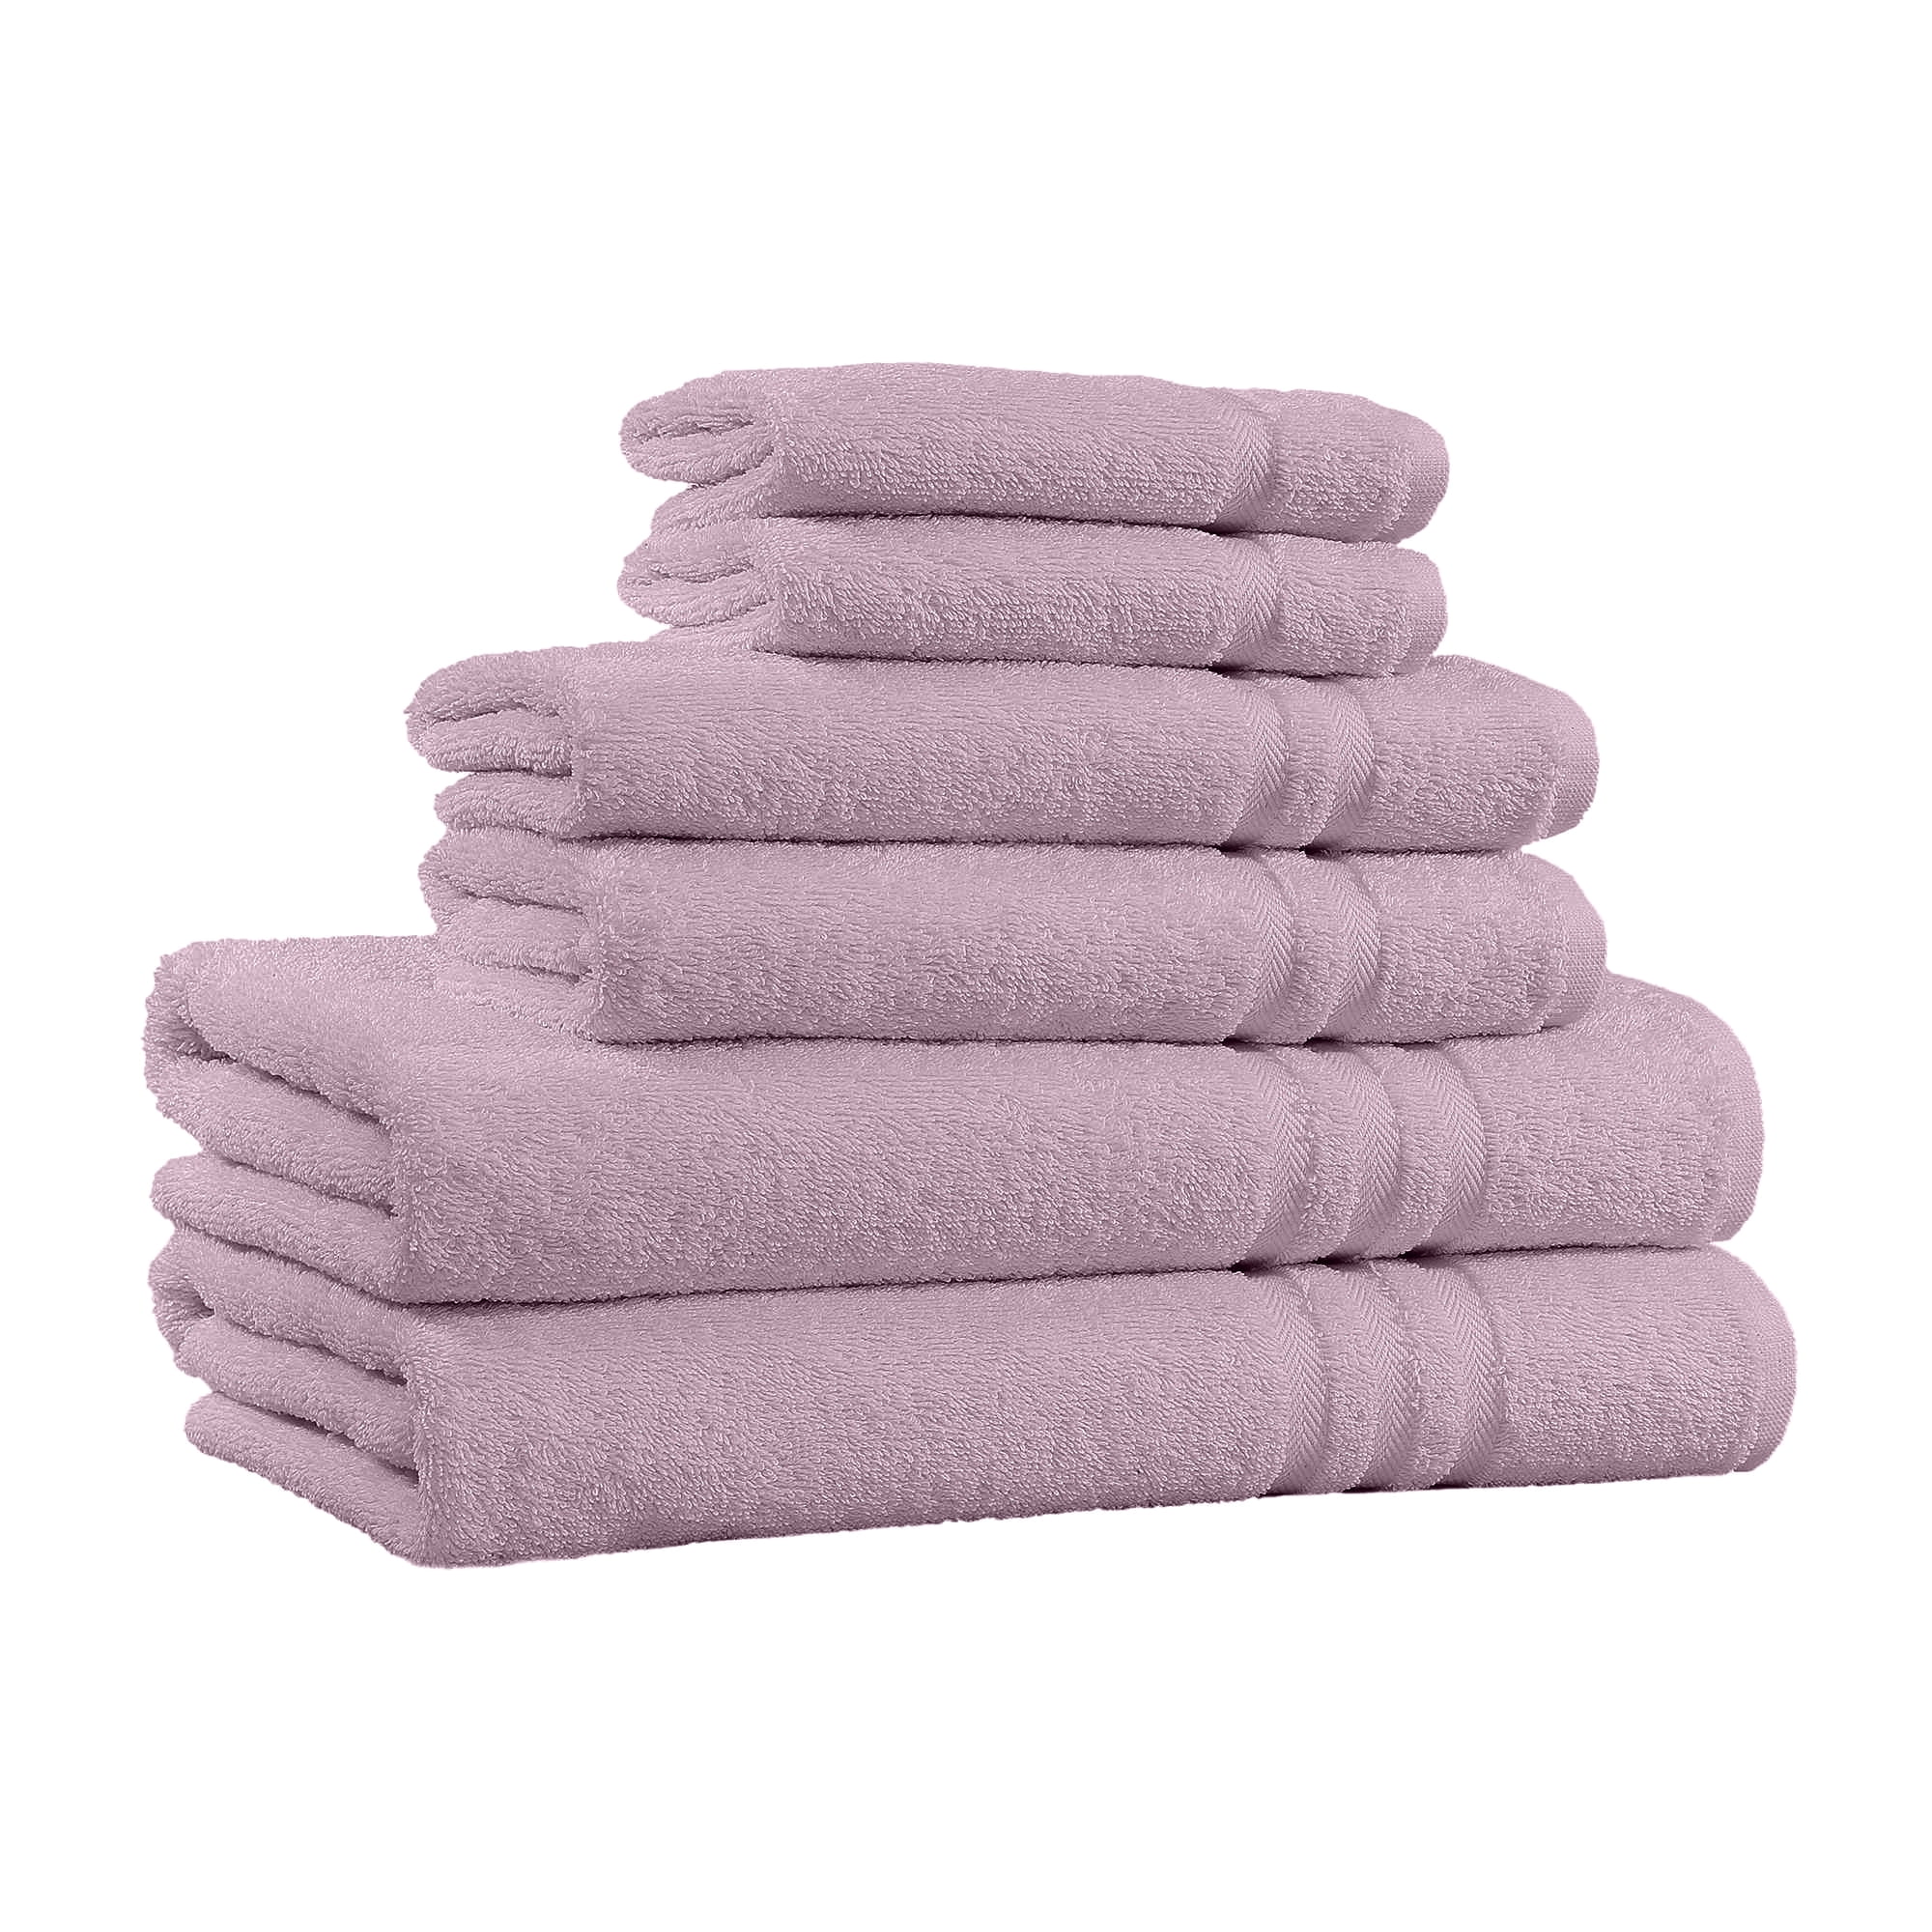 A /& B TRADERS Hand Towels Set Grey Super Soft 100/% Pure Egyptian Cotton 2 or 4 Hand Towels Bathroom Gym Sports 2